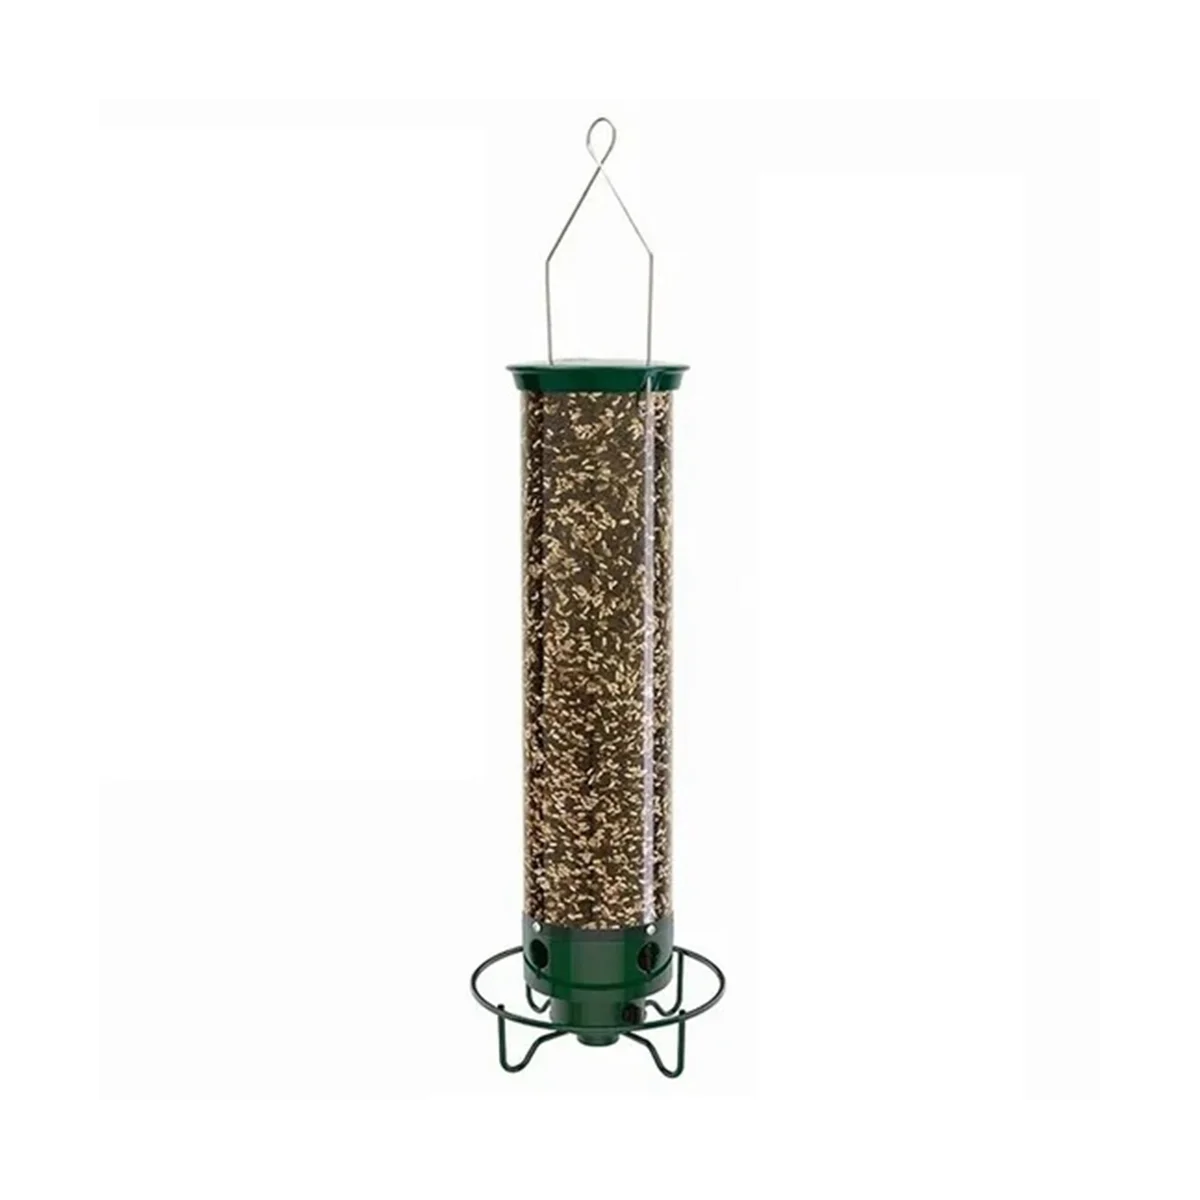 

Droll Yankees YF-M Yankee Flipper Squirrel-Proof Wild Bird Feeder with Weight Activated Rotating Perch